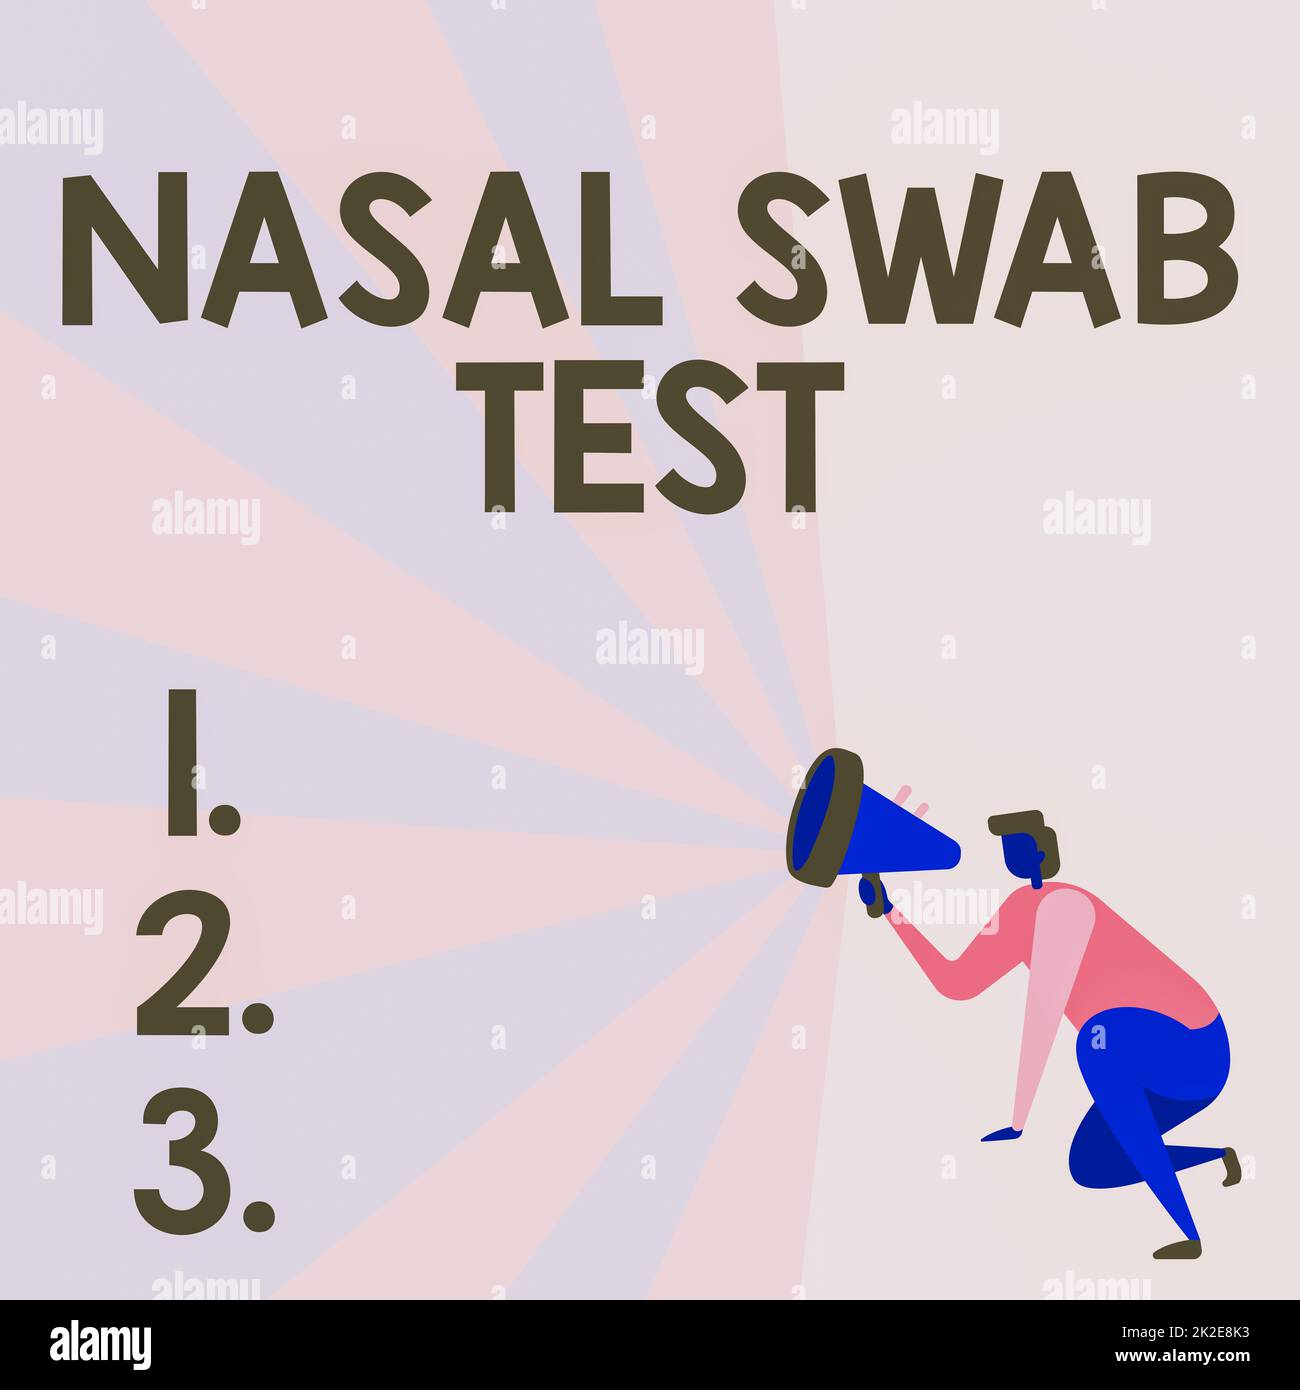 Conceptual display Nasal Swab Test. Business idea diagnosing an upper respiratory tract infection through nasal secretion Illustration Of A Person Kneeling Using Megaphone Making New Announcement. Stock Photo